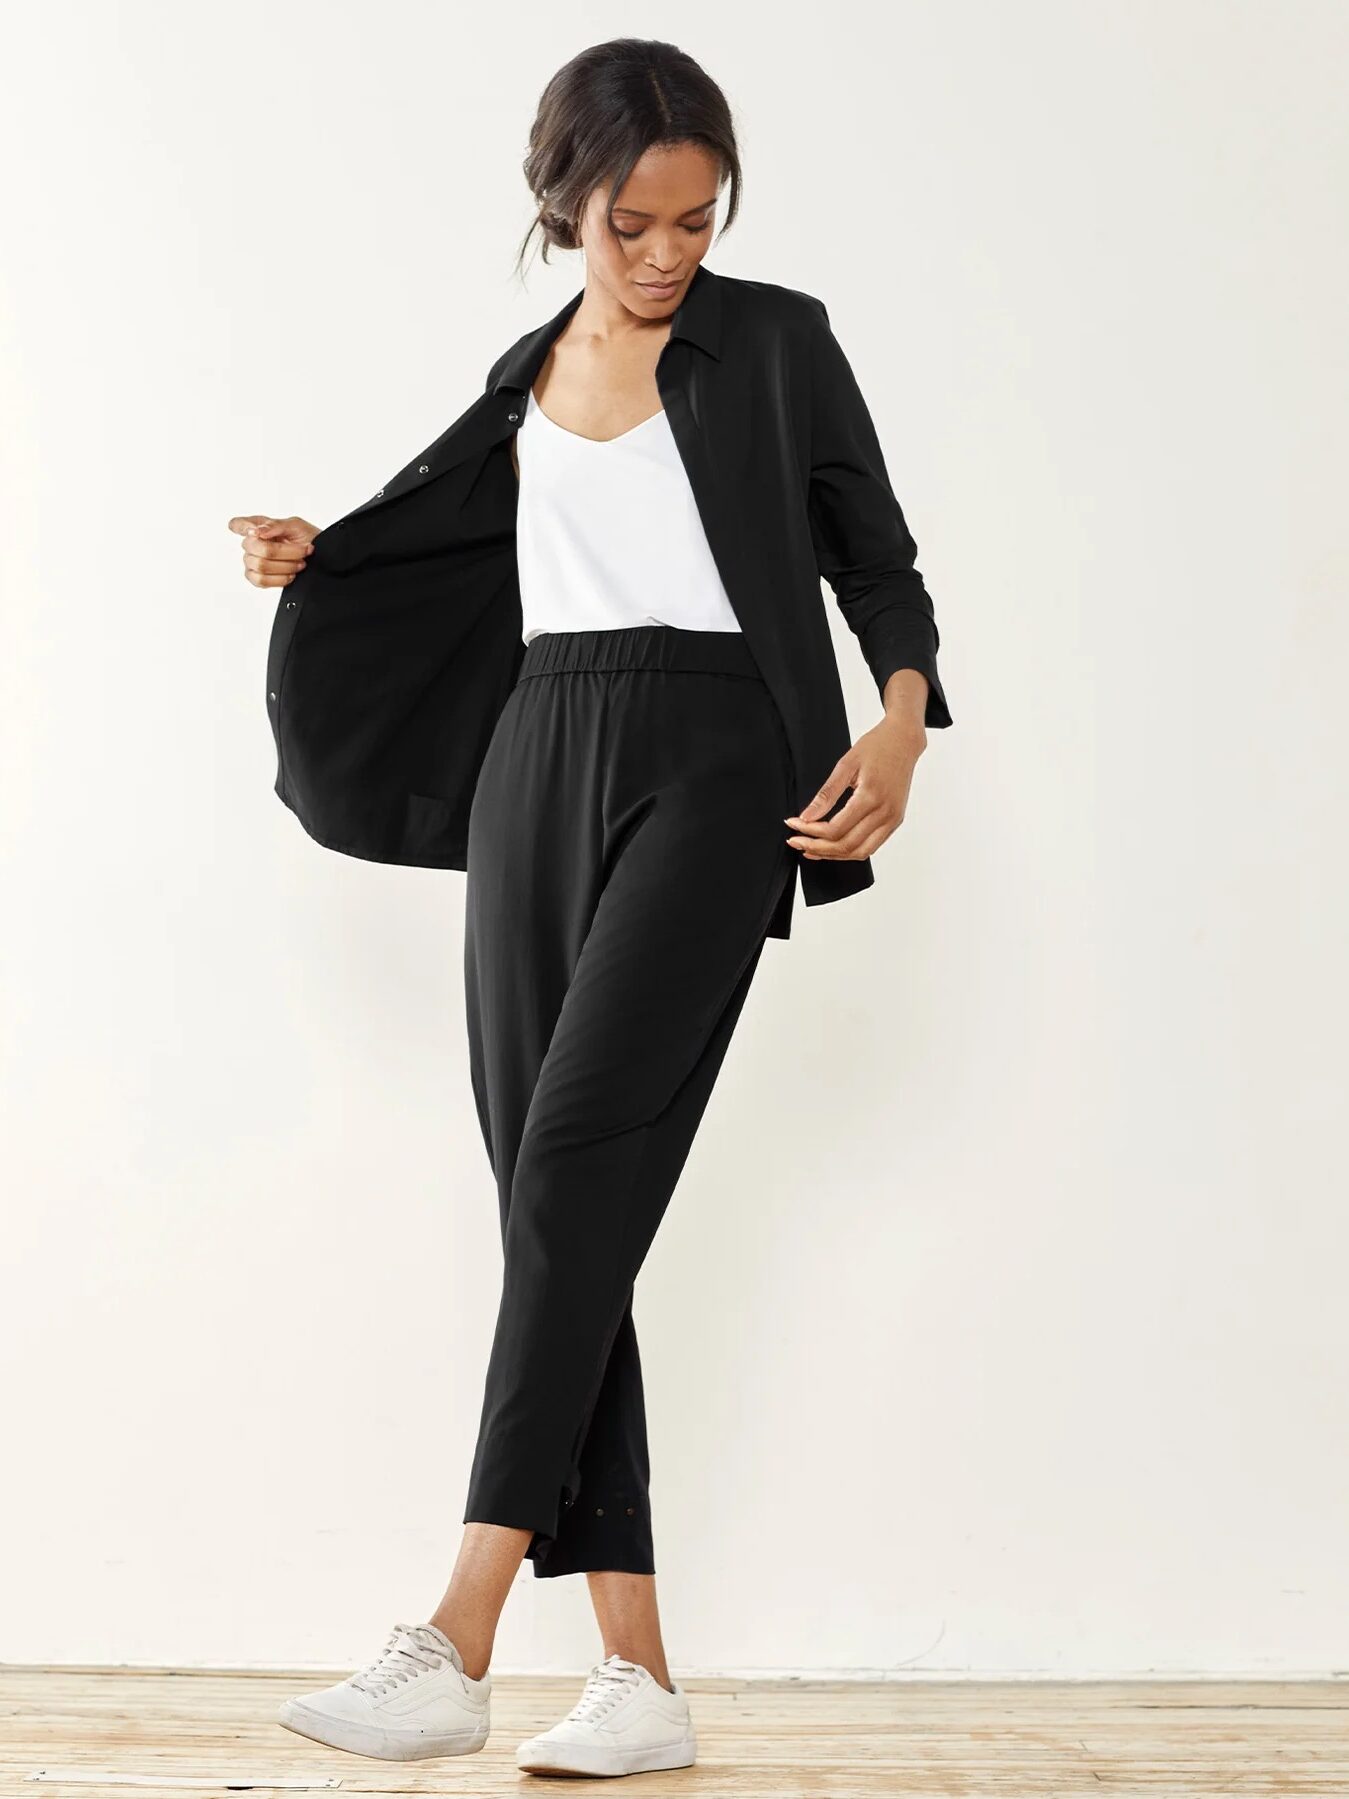 A woman in a black blazer and trousers with white sneakers posing against a neutral background.